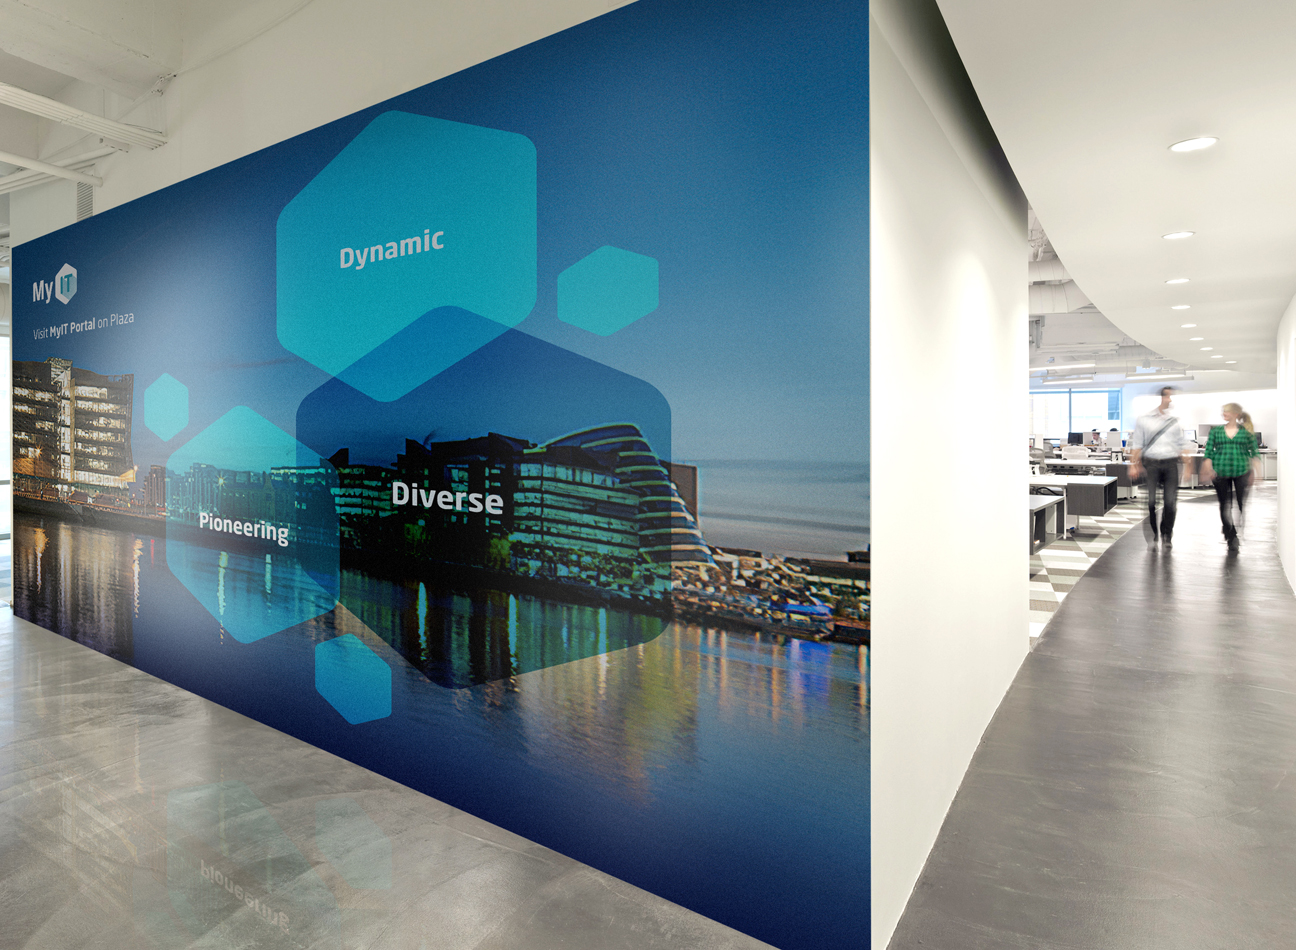 Wall signage design showing the Central bank of Ireland and their mission statemtent